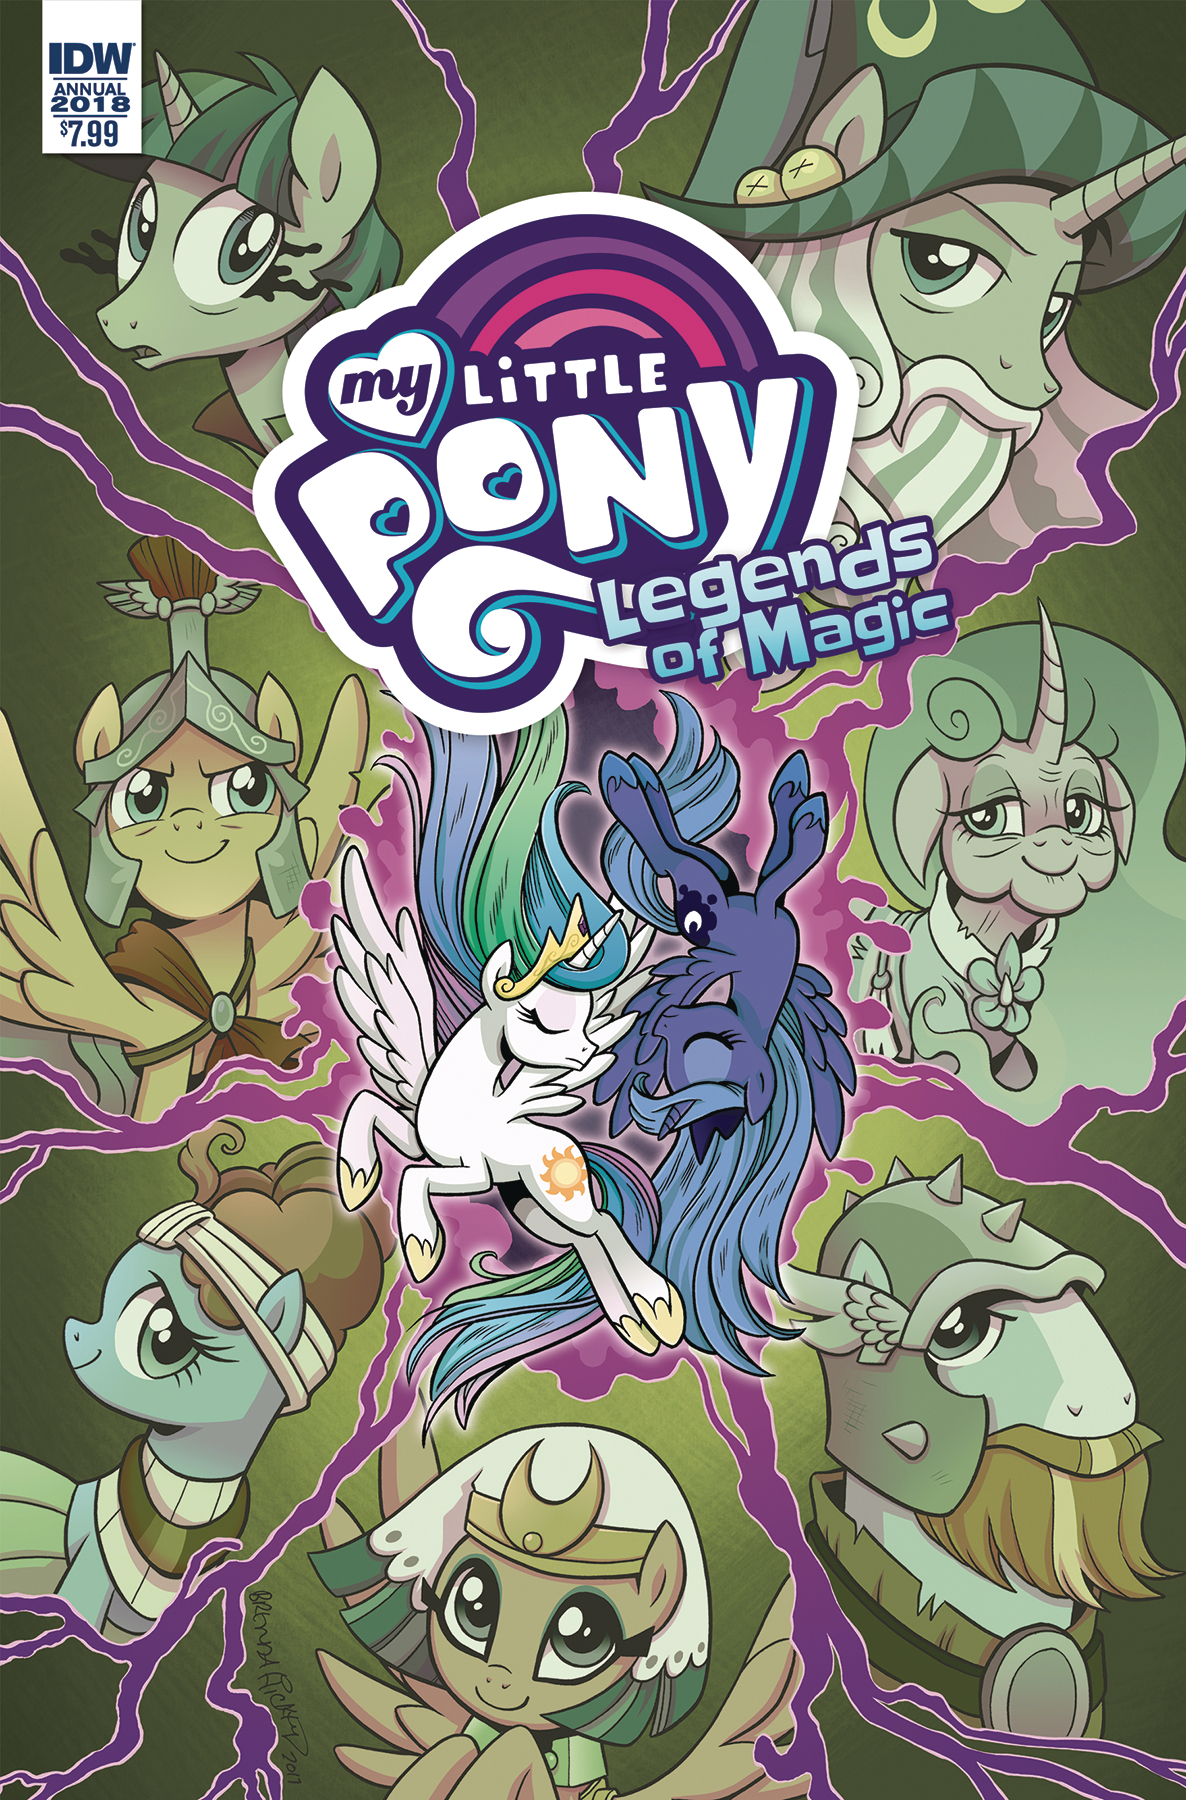 MY LITTLE PONY LEGENDS OF MAGIC ANNUAL 2018